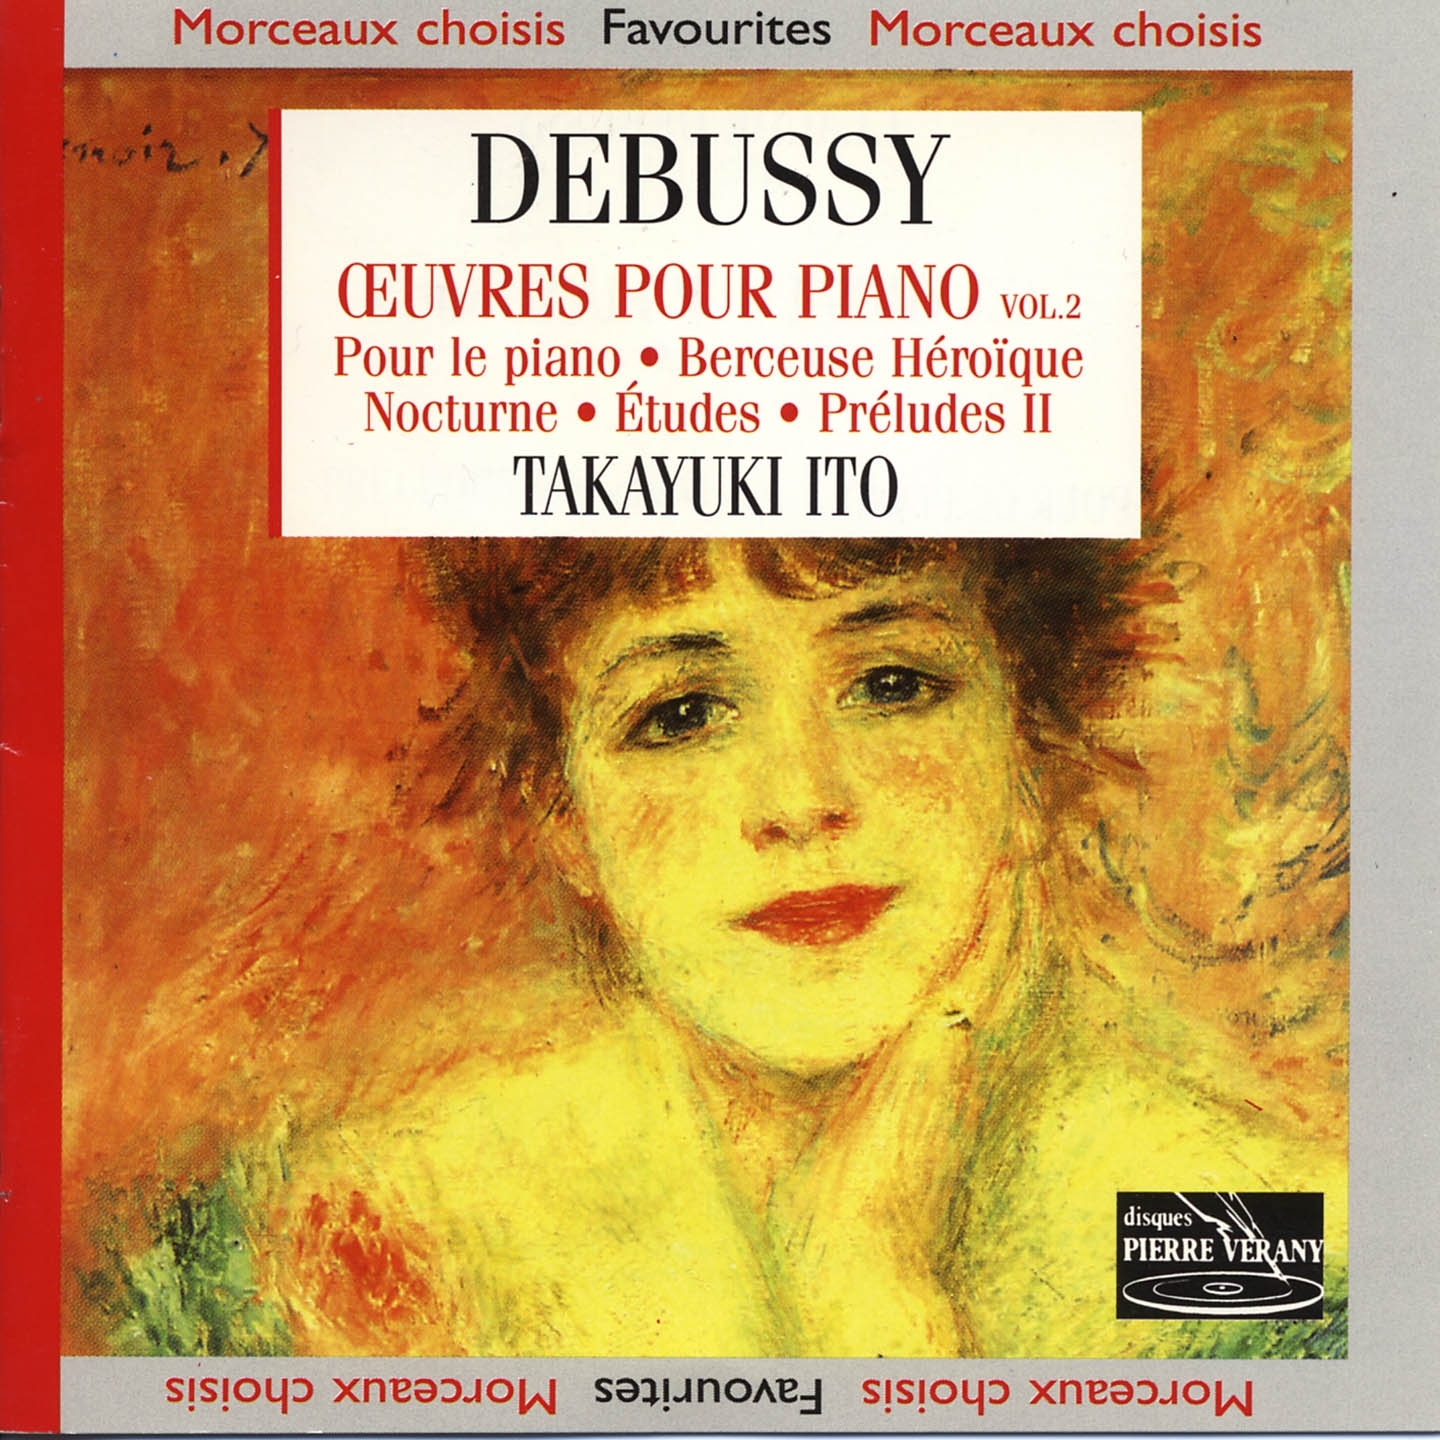 Debussy : uvres pour piano, vol. 2